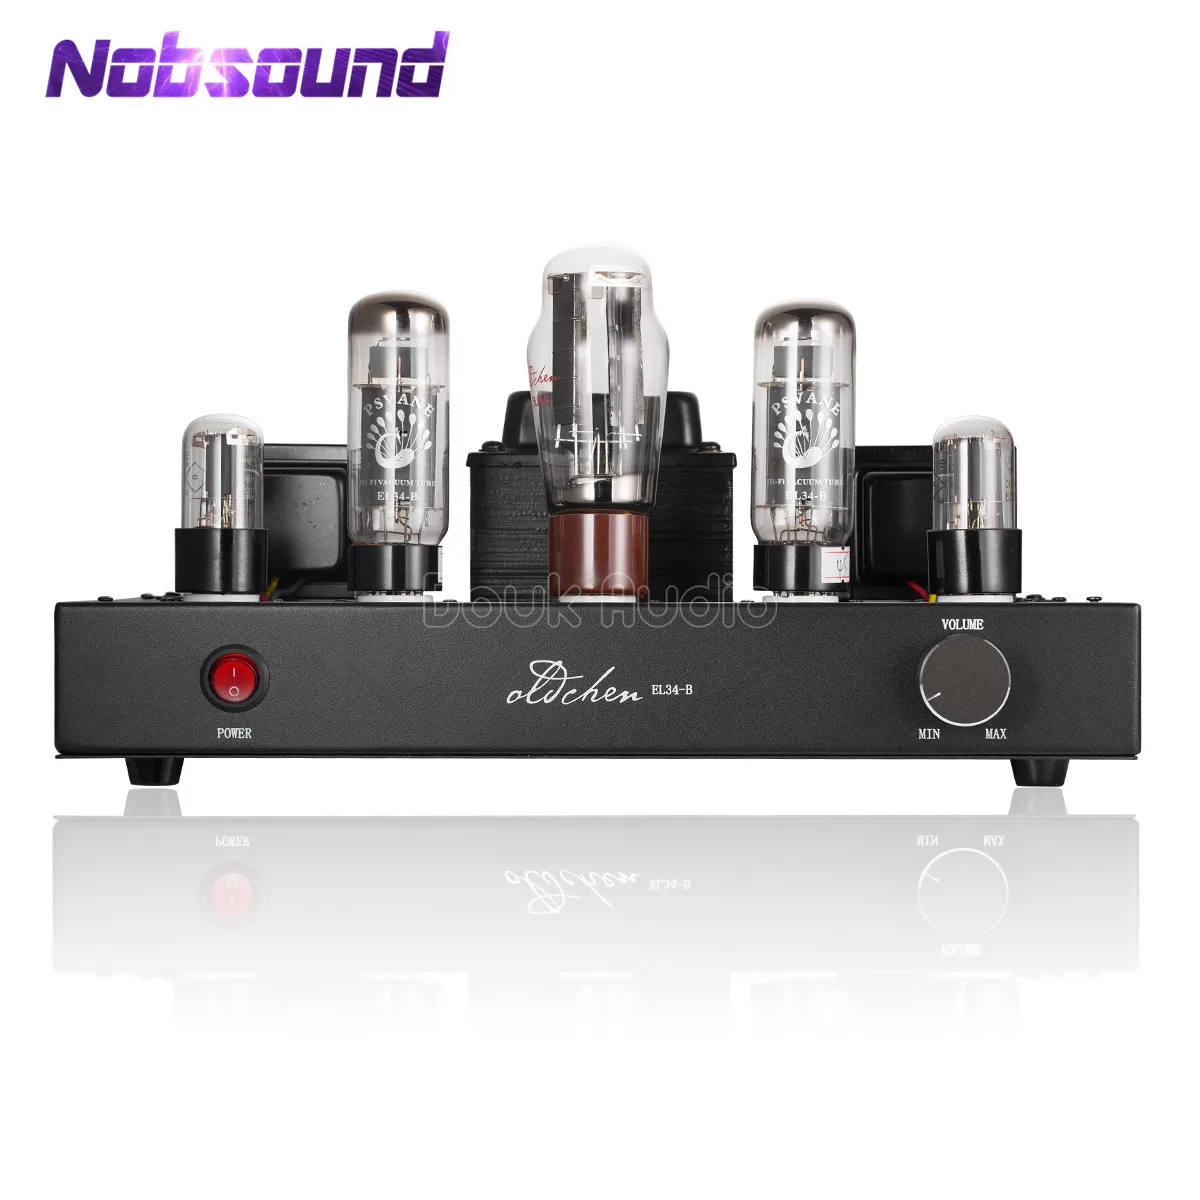 

Nobsound 5Z3P Push PSVANE EL34 Vacuum Tube Amplifier 2.0 Channel Single-ended Class A Stereo Audio HI-FI Amp